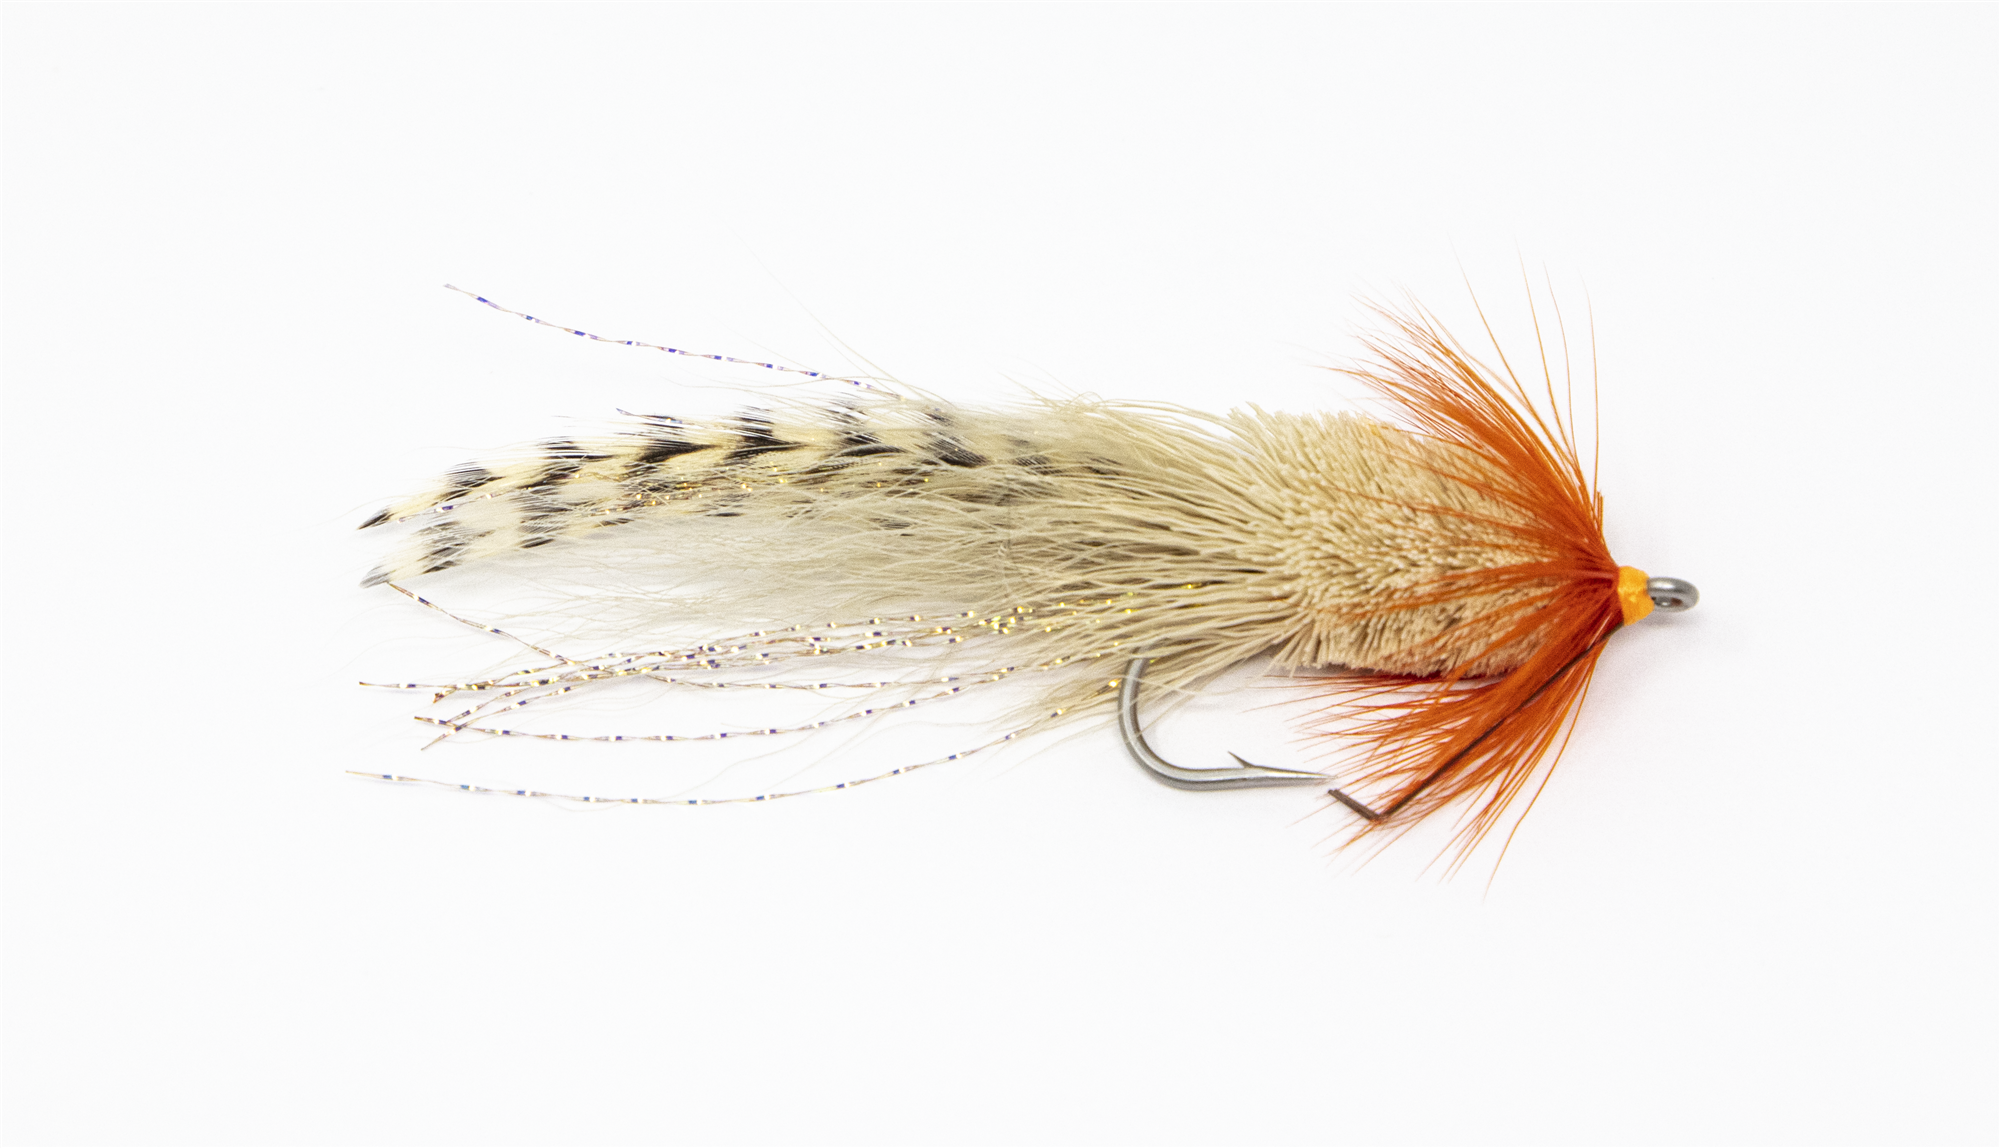 Olson Slider fly pattern is a great fly to fish on sinking fly lines as a neutrally buoyant fly fishing fly.